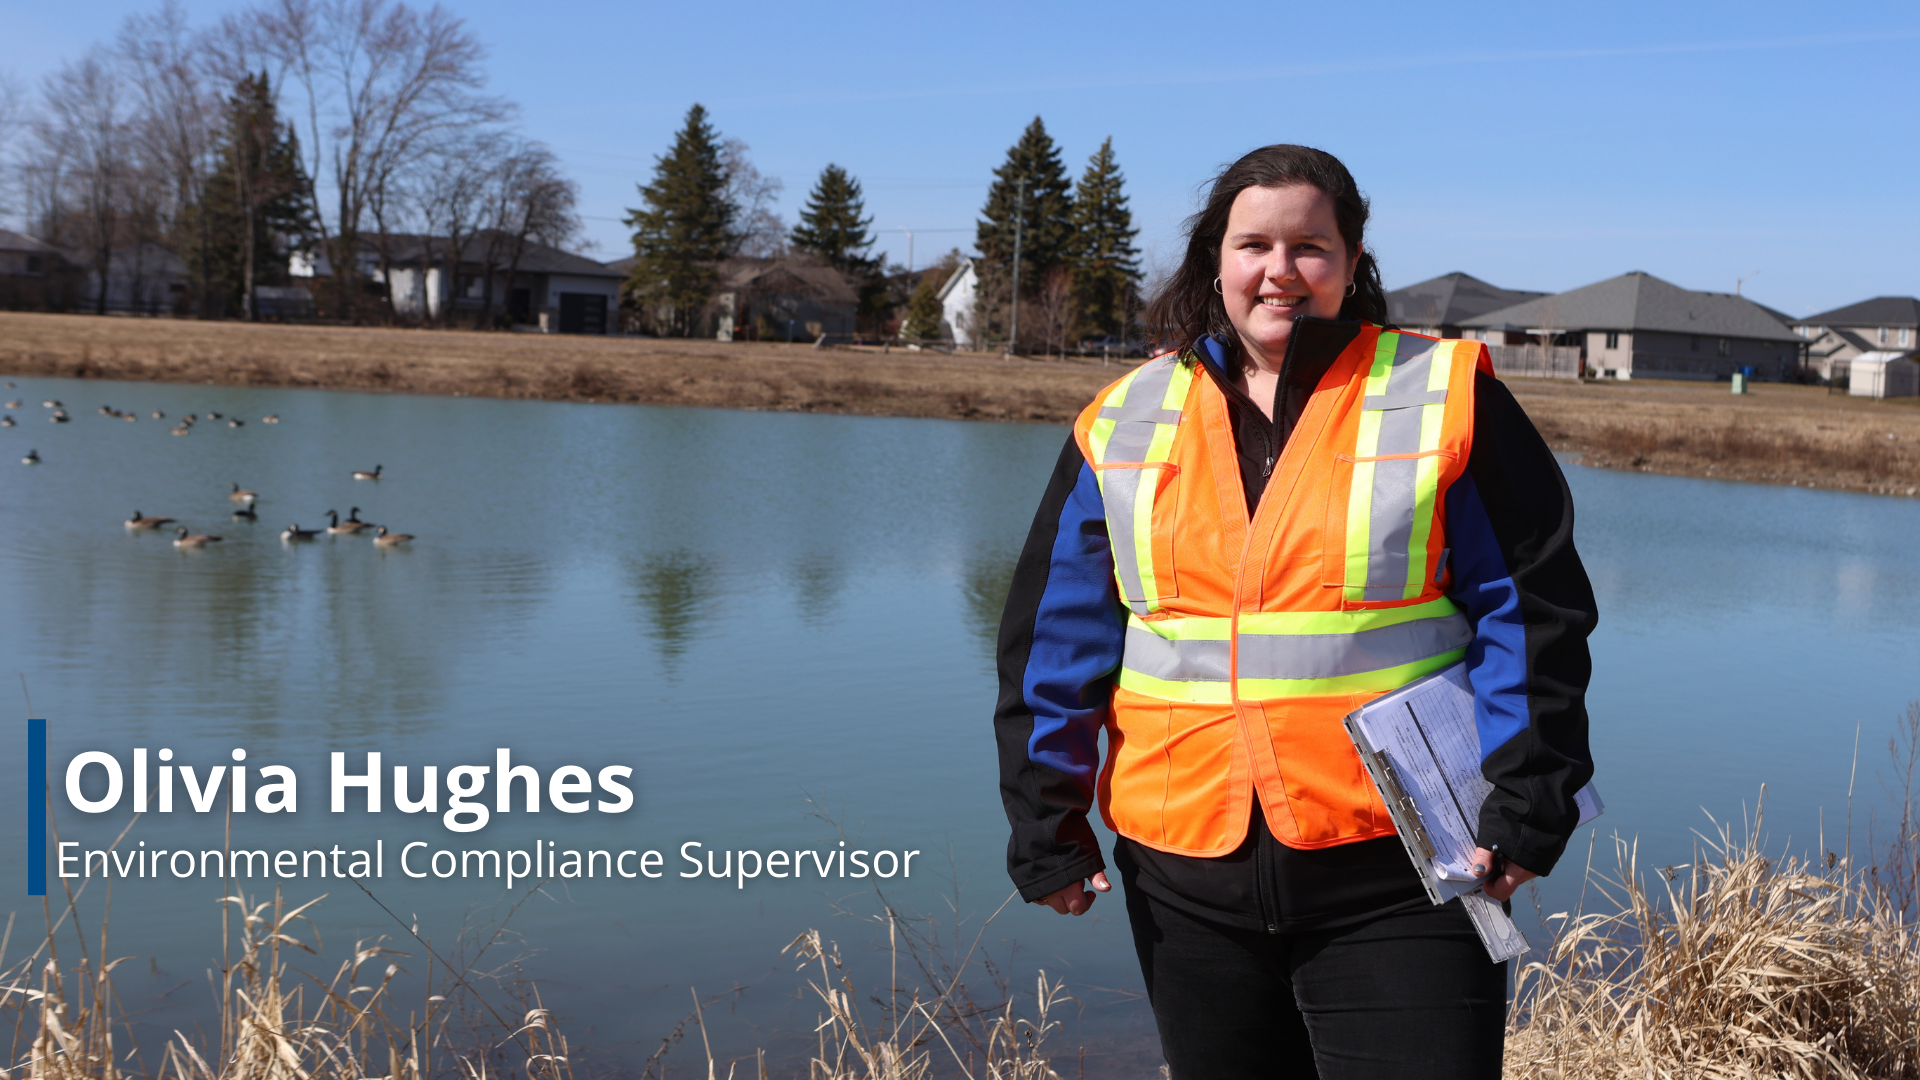 A photo of Olivia Hughes, a Environmental Compliance Supervisor in front of a storm water pond.